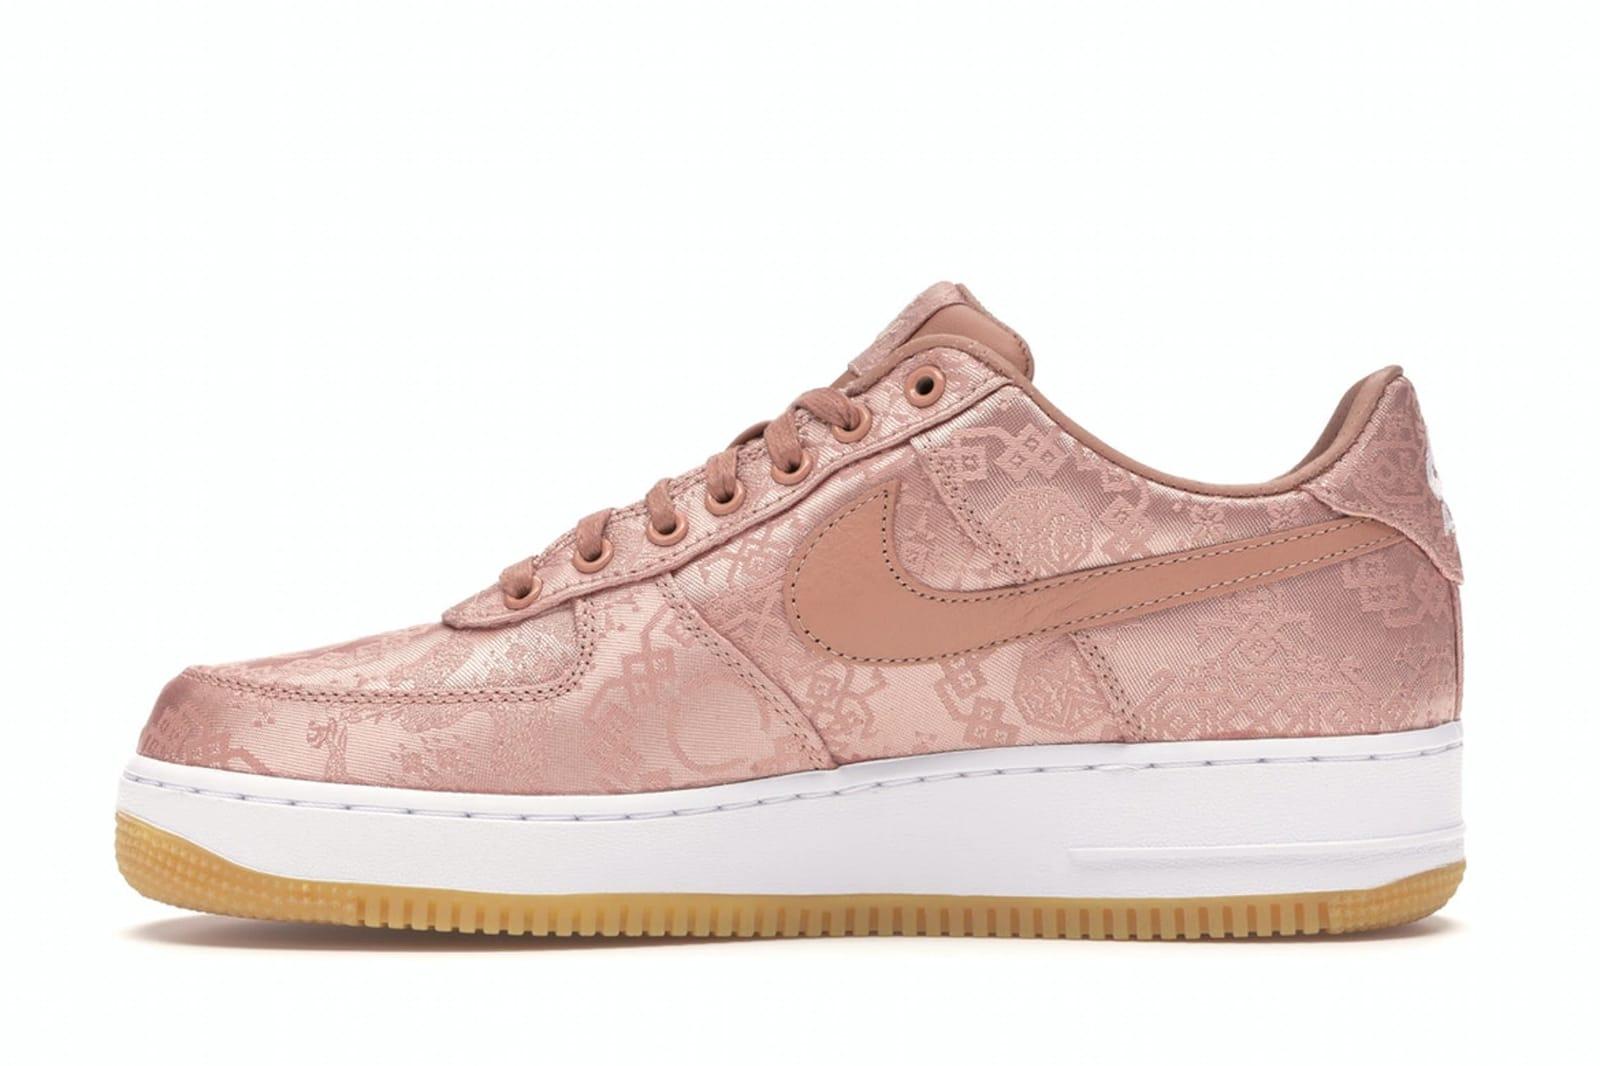 Nike Air Force 1 Low Clot Rose Gold Silk in Black | Lyst